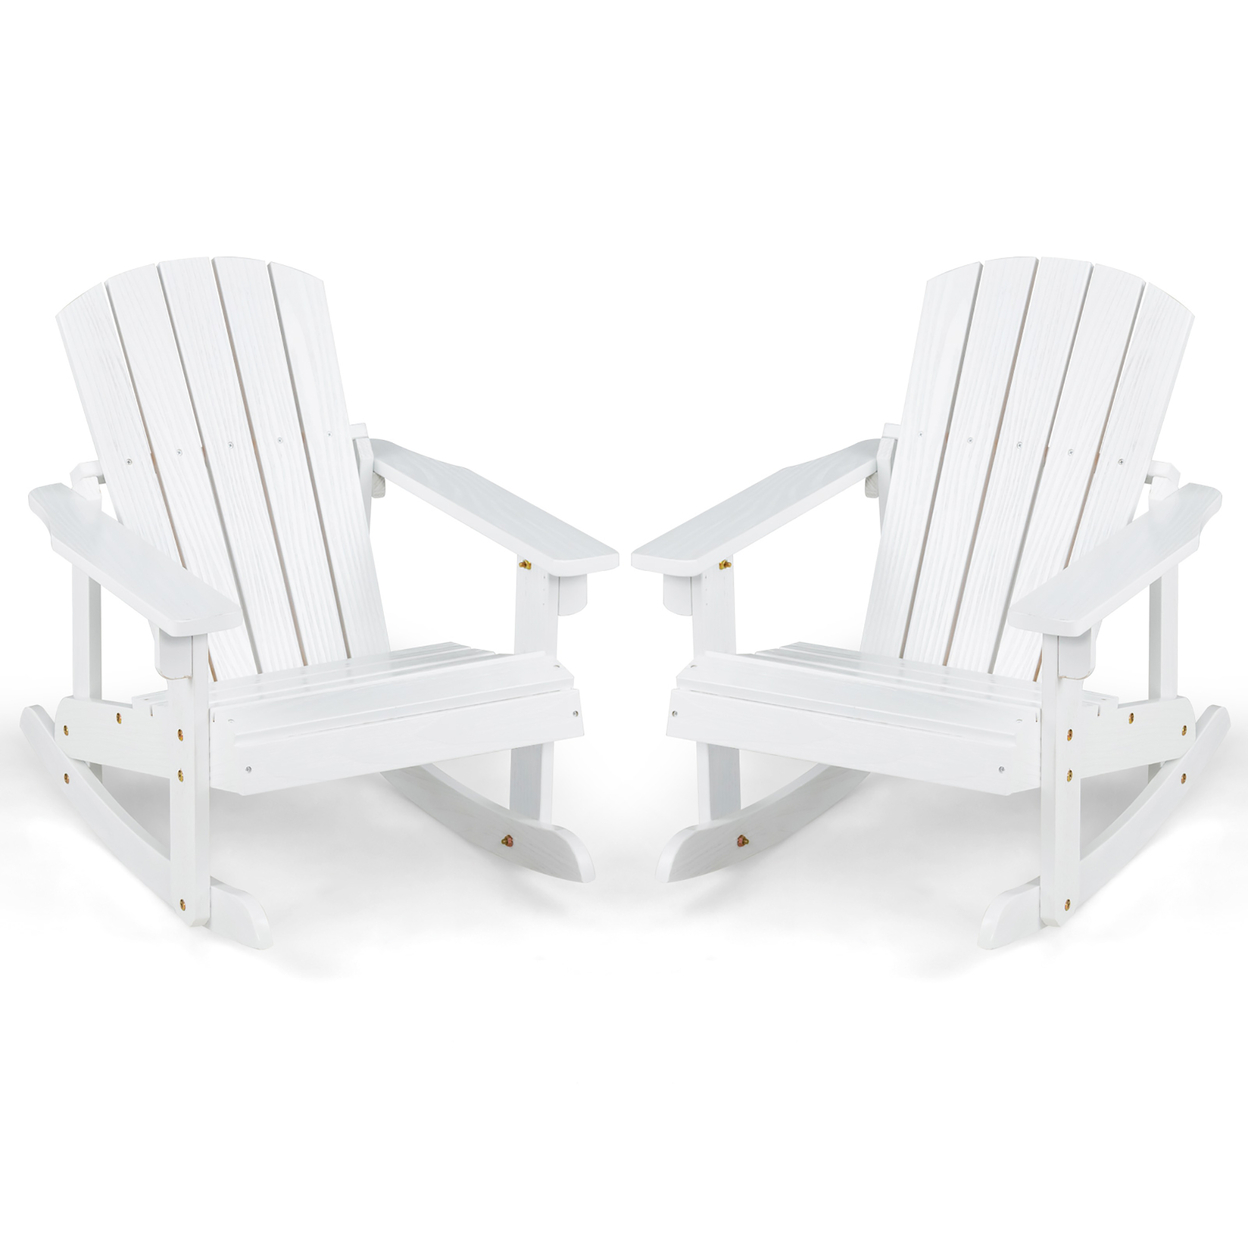 2PCS Kid Adirondack Rocking Chair Outdoor Solid Wood Slatted Seat Backrest - White